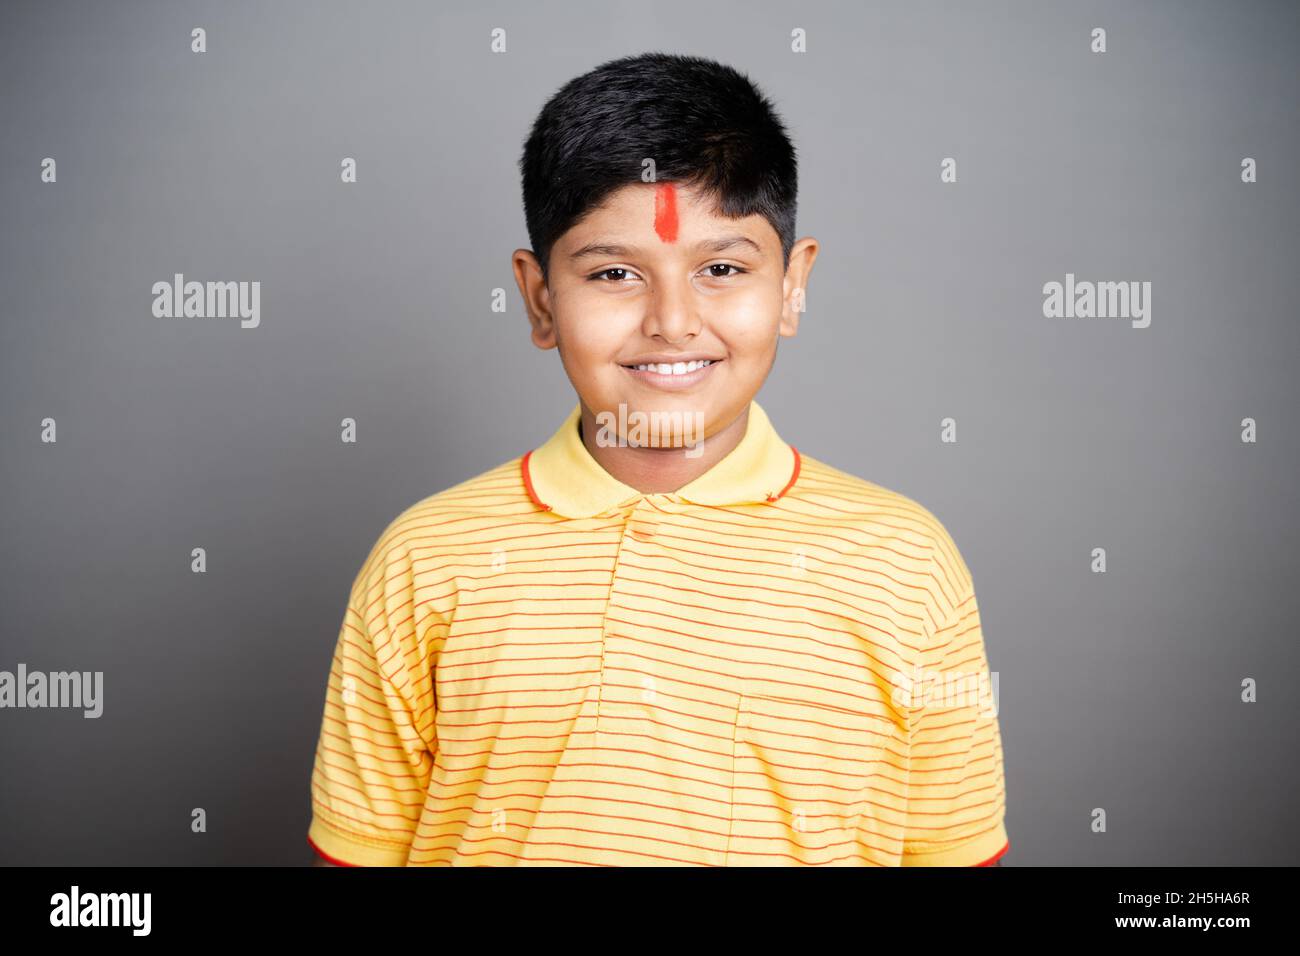 Happy Hindu kid with kumkum Bindi or Tilak on forehead by looking at camera on studio background - concept of smiling and positive joyful expression Stock Photo